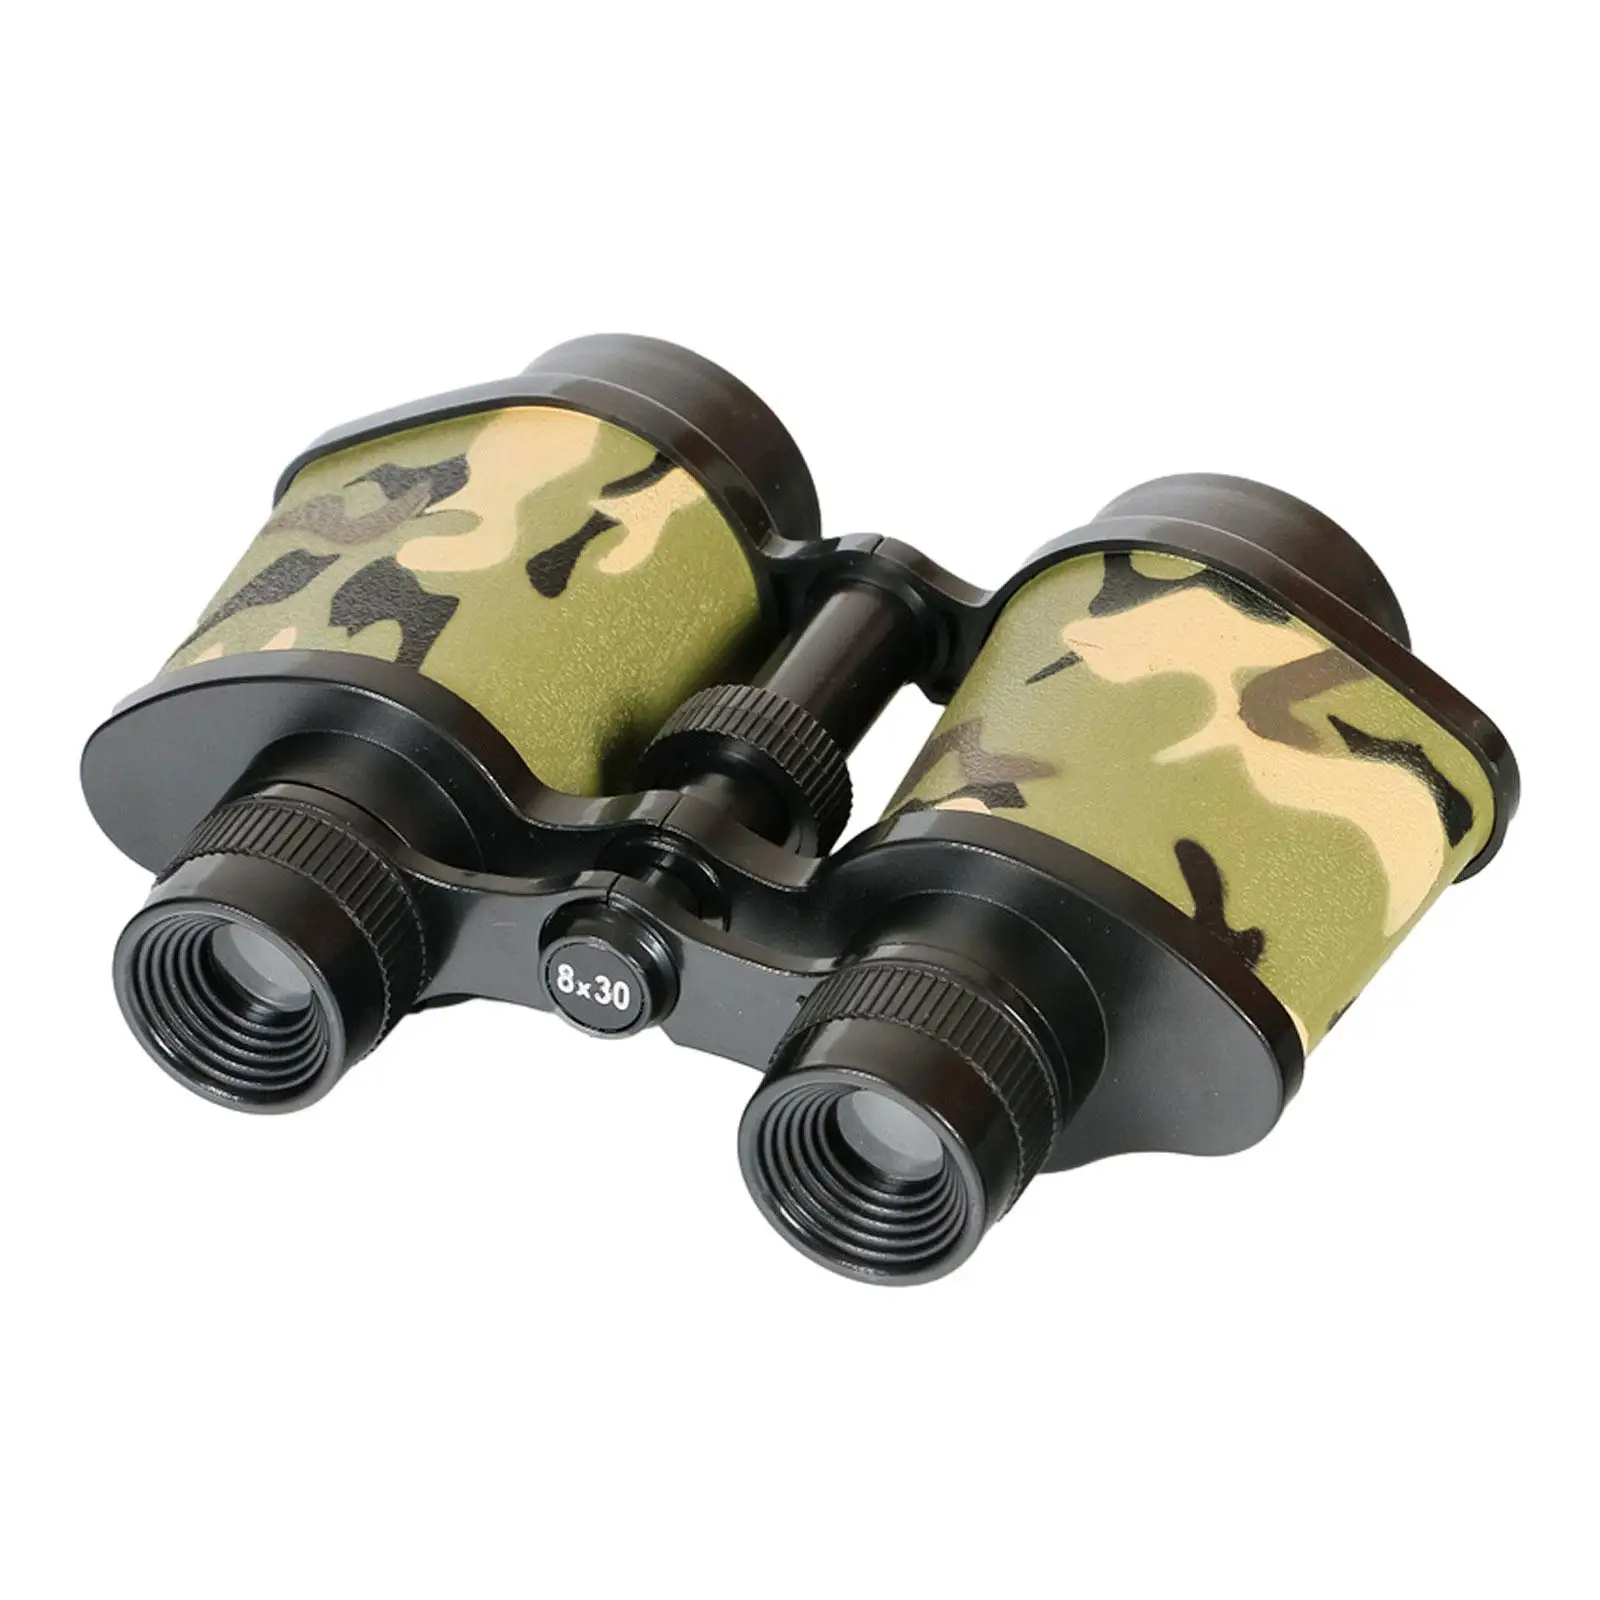 Kids Binoculars 8x30 Children Magnification Toy for Sciences Presents Hunting